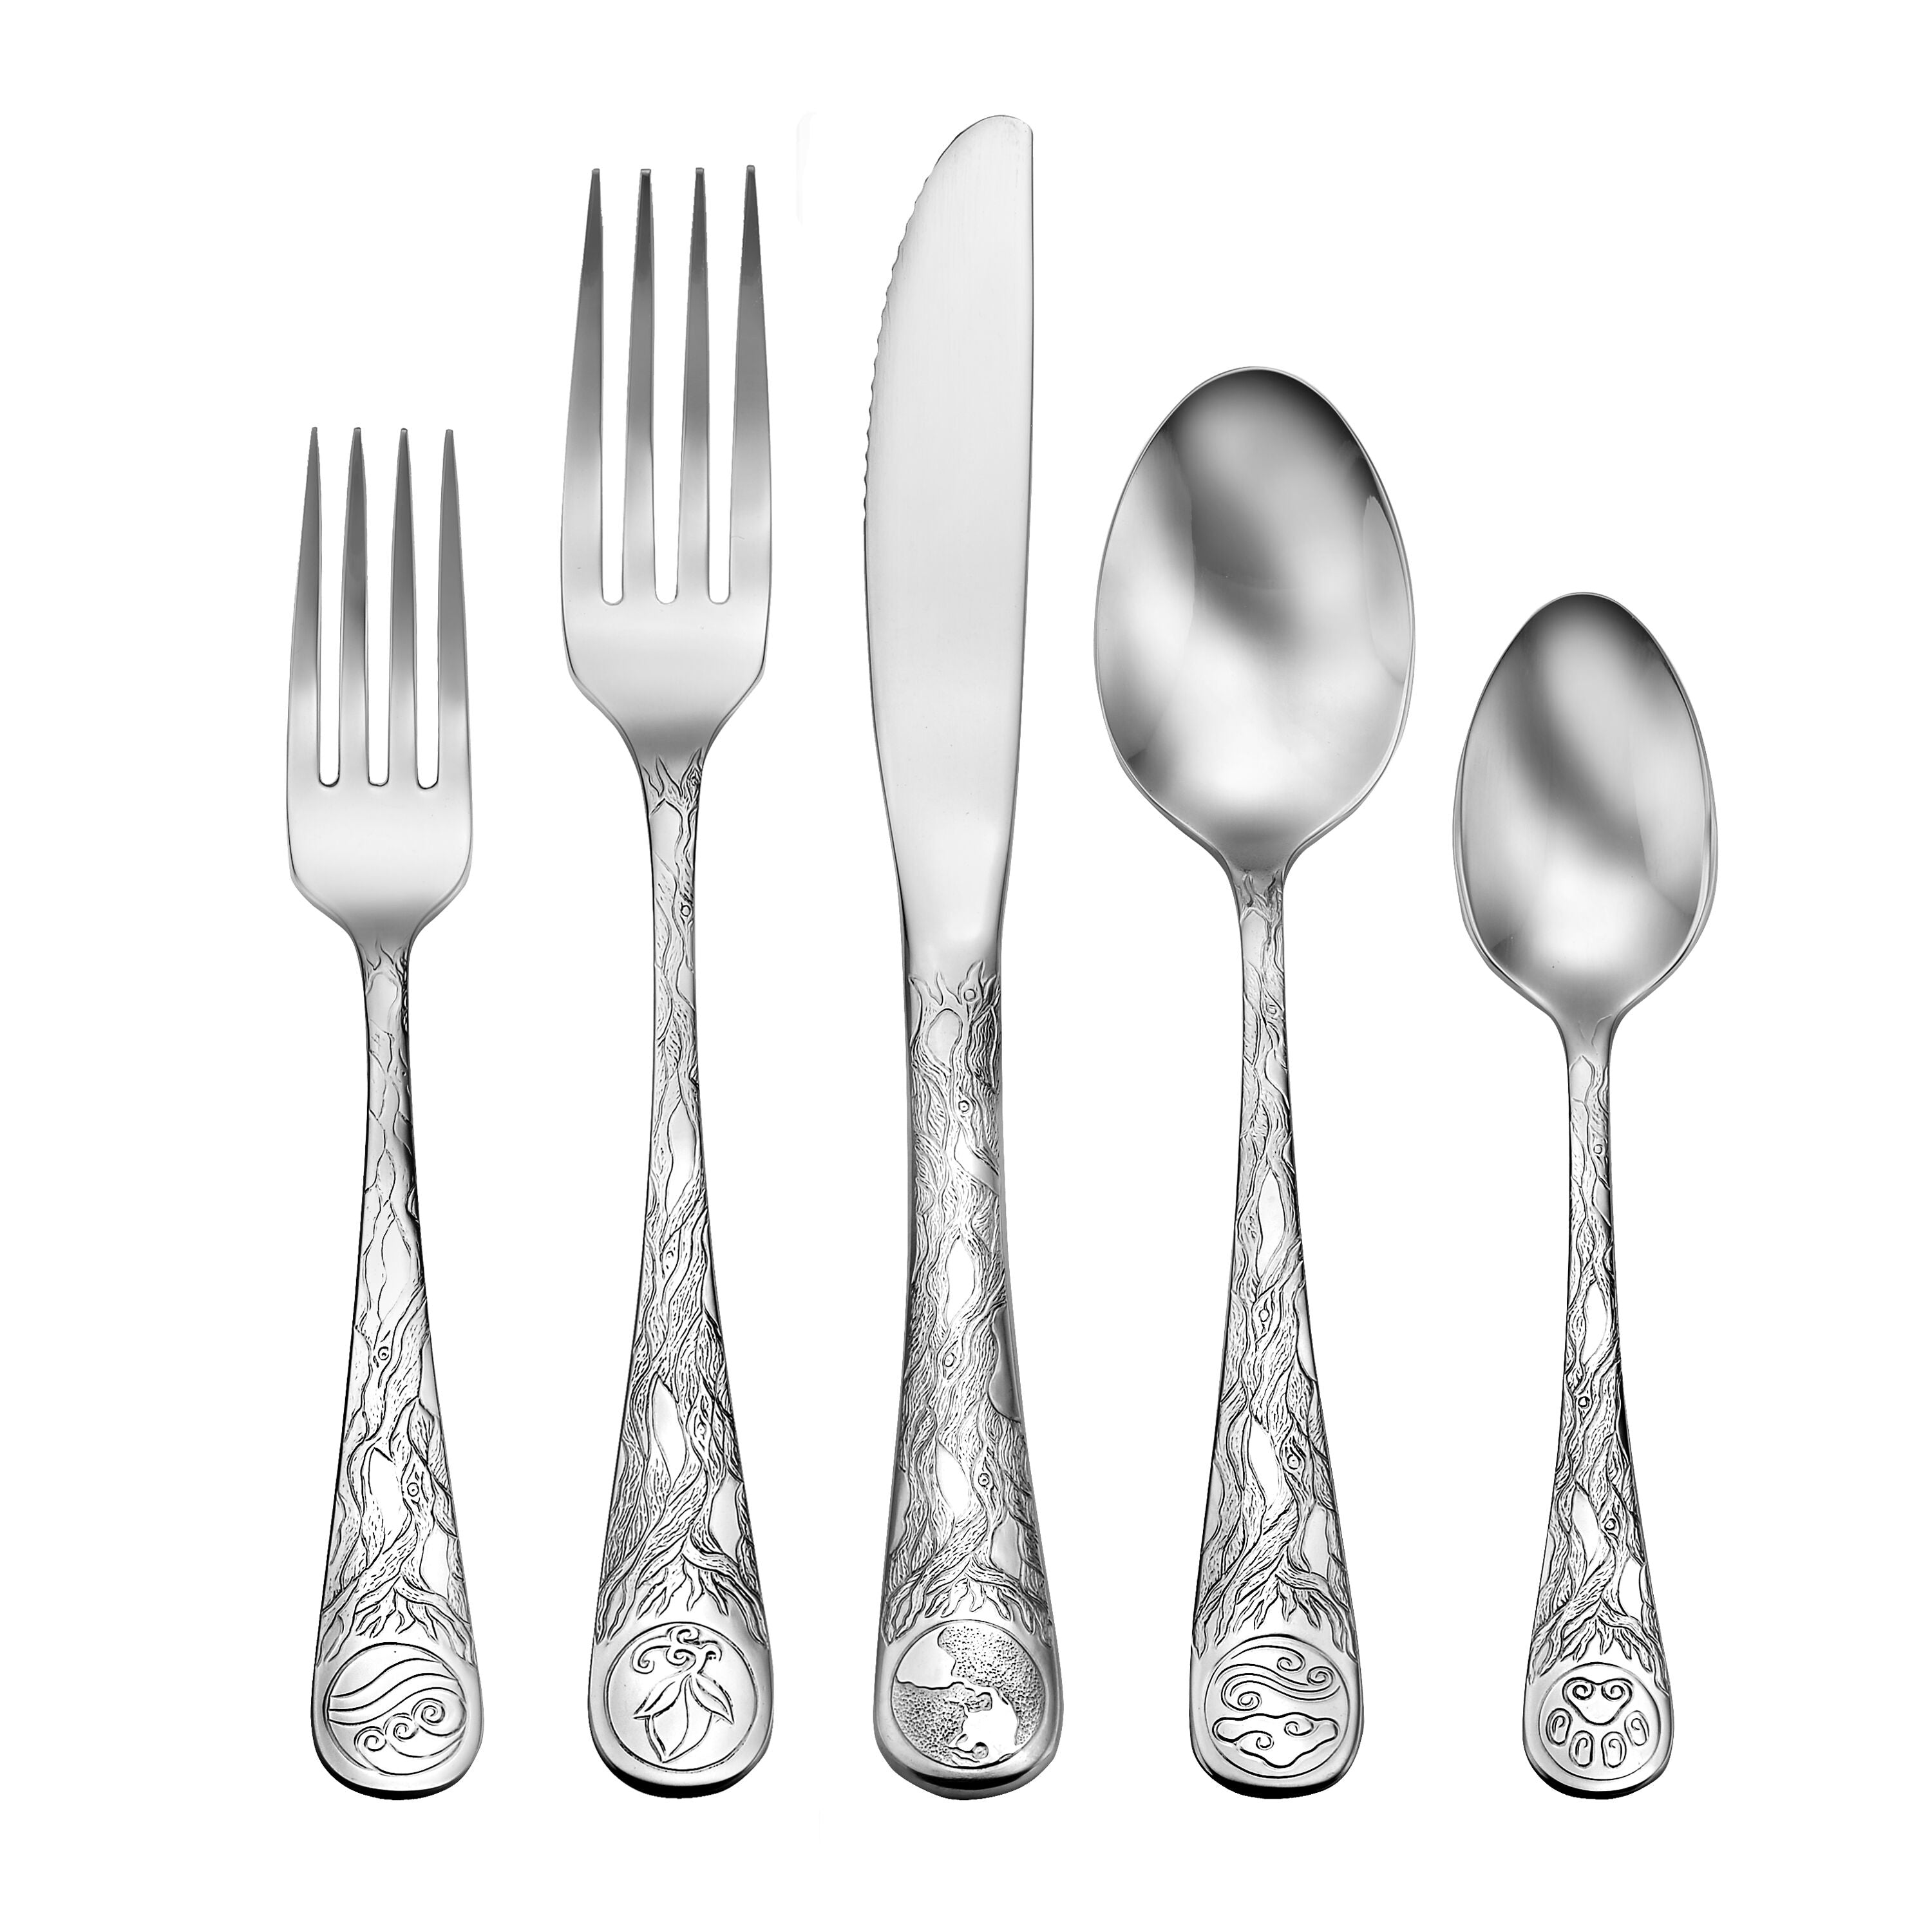 US-made Stainless Steel Flatware Sets – Airstream Supply Company